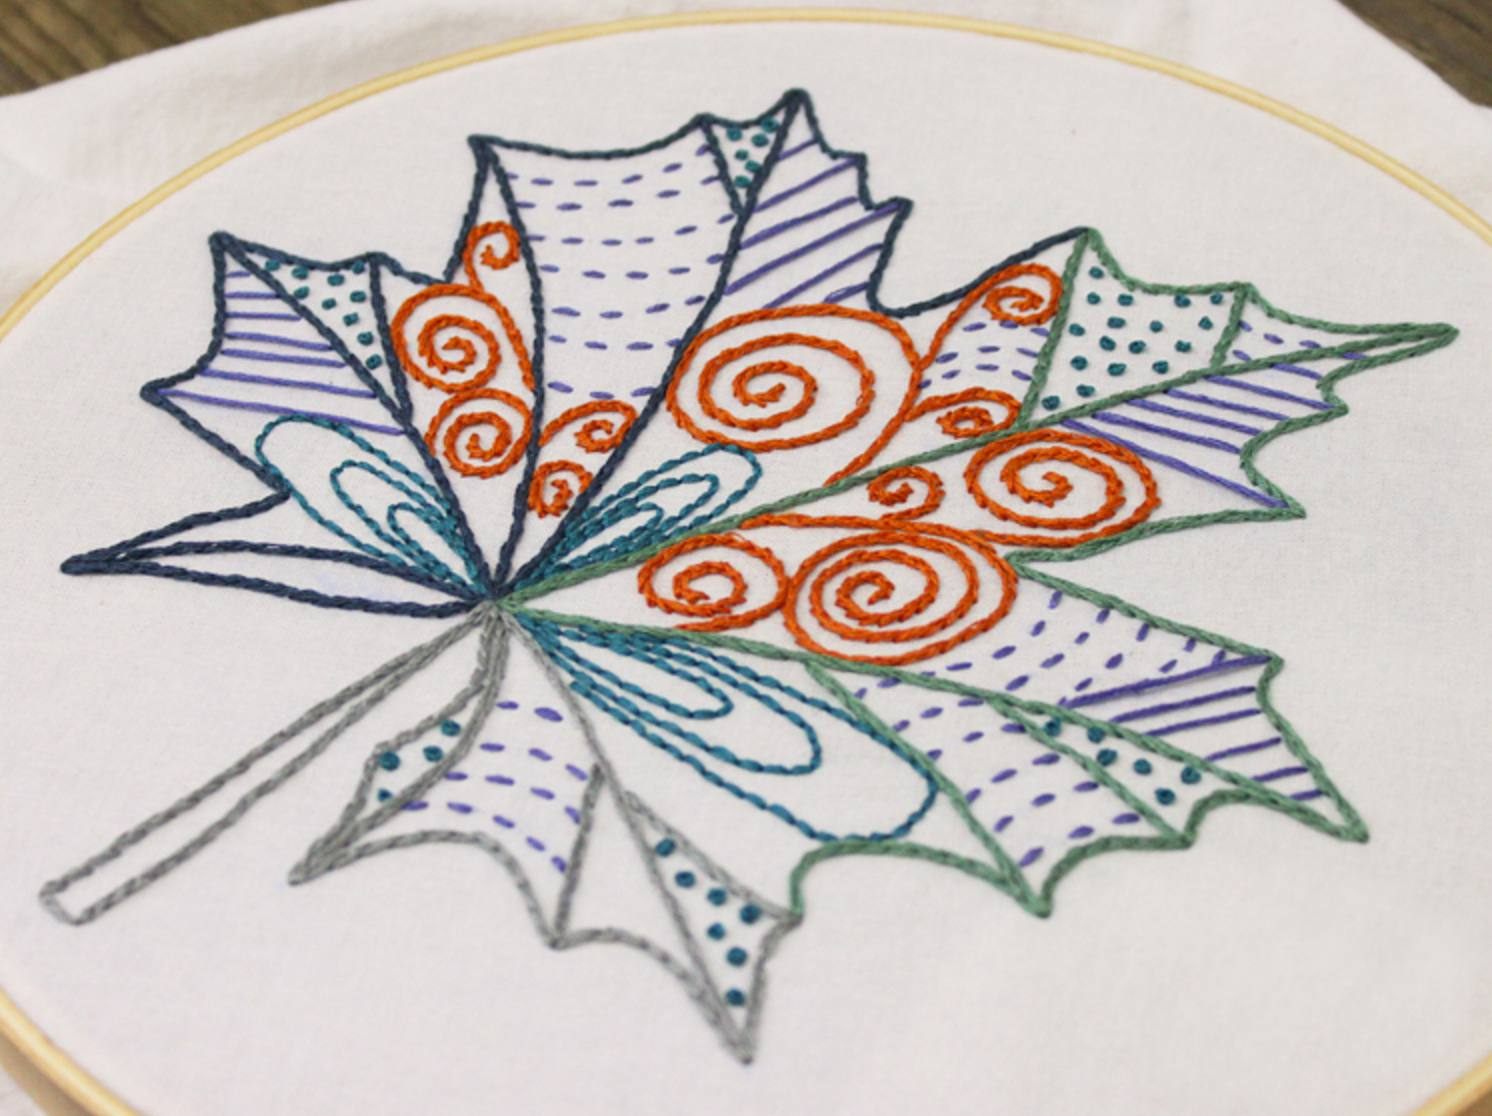 Hand Stitch Embroidery Patterns Free 10 Hand Embroidery Patterns For Autumn Stitching